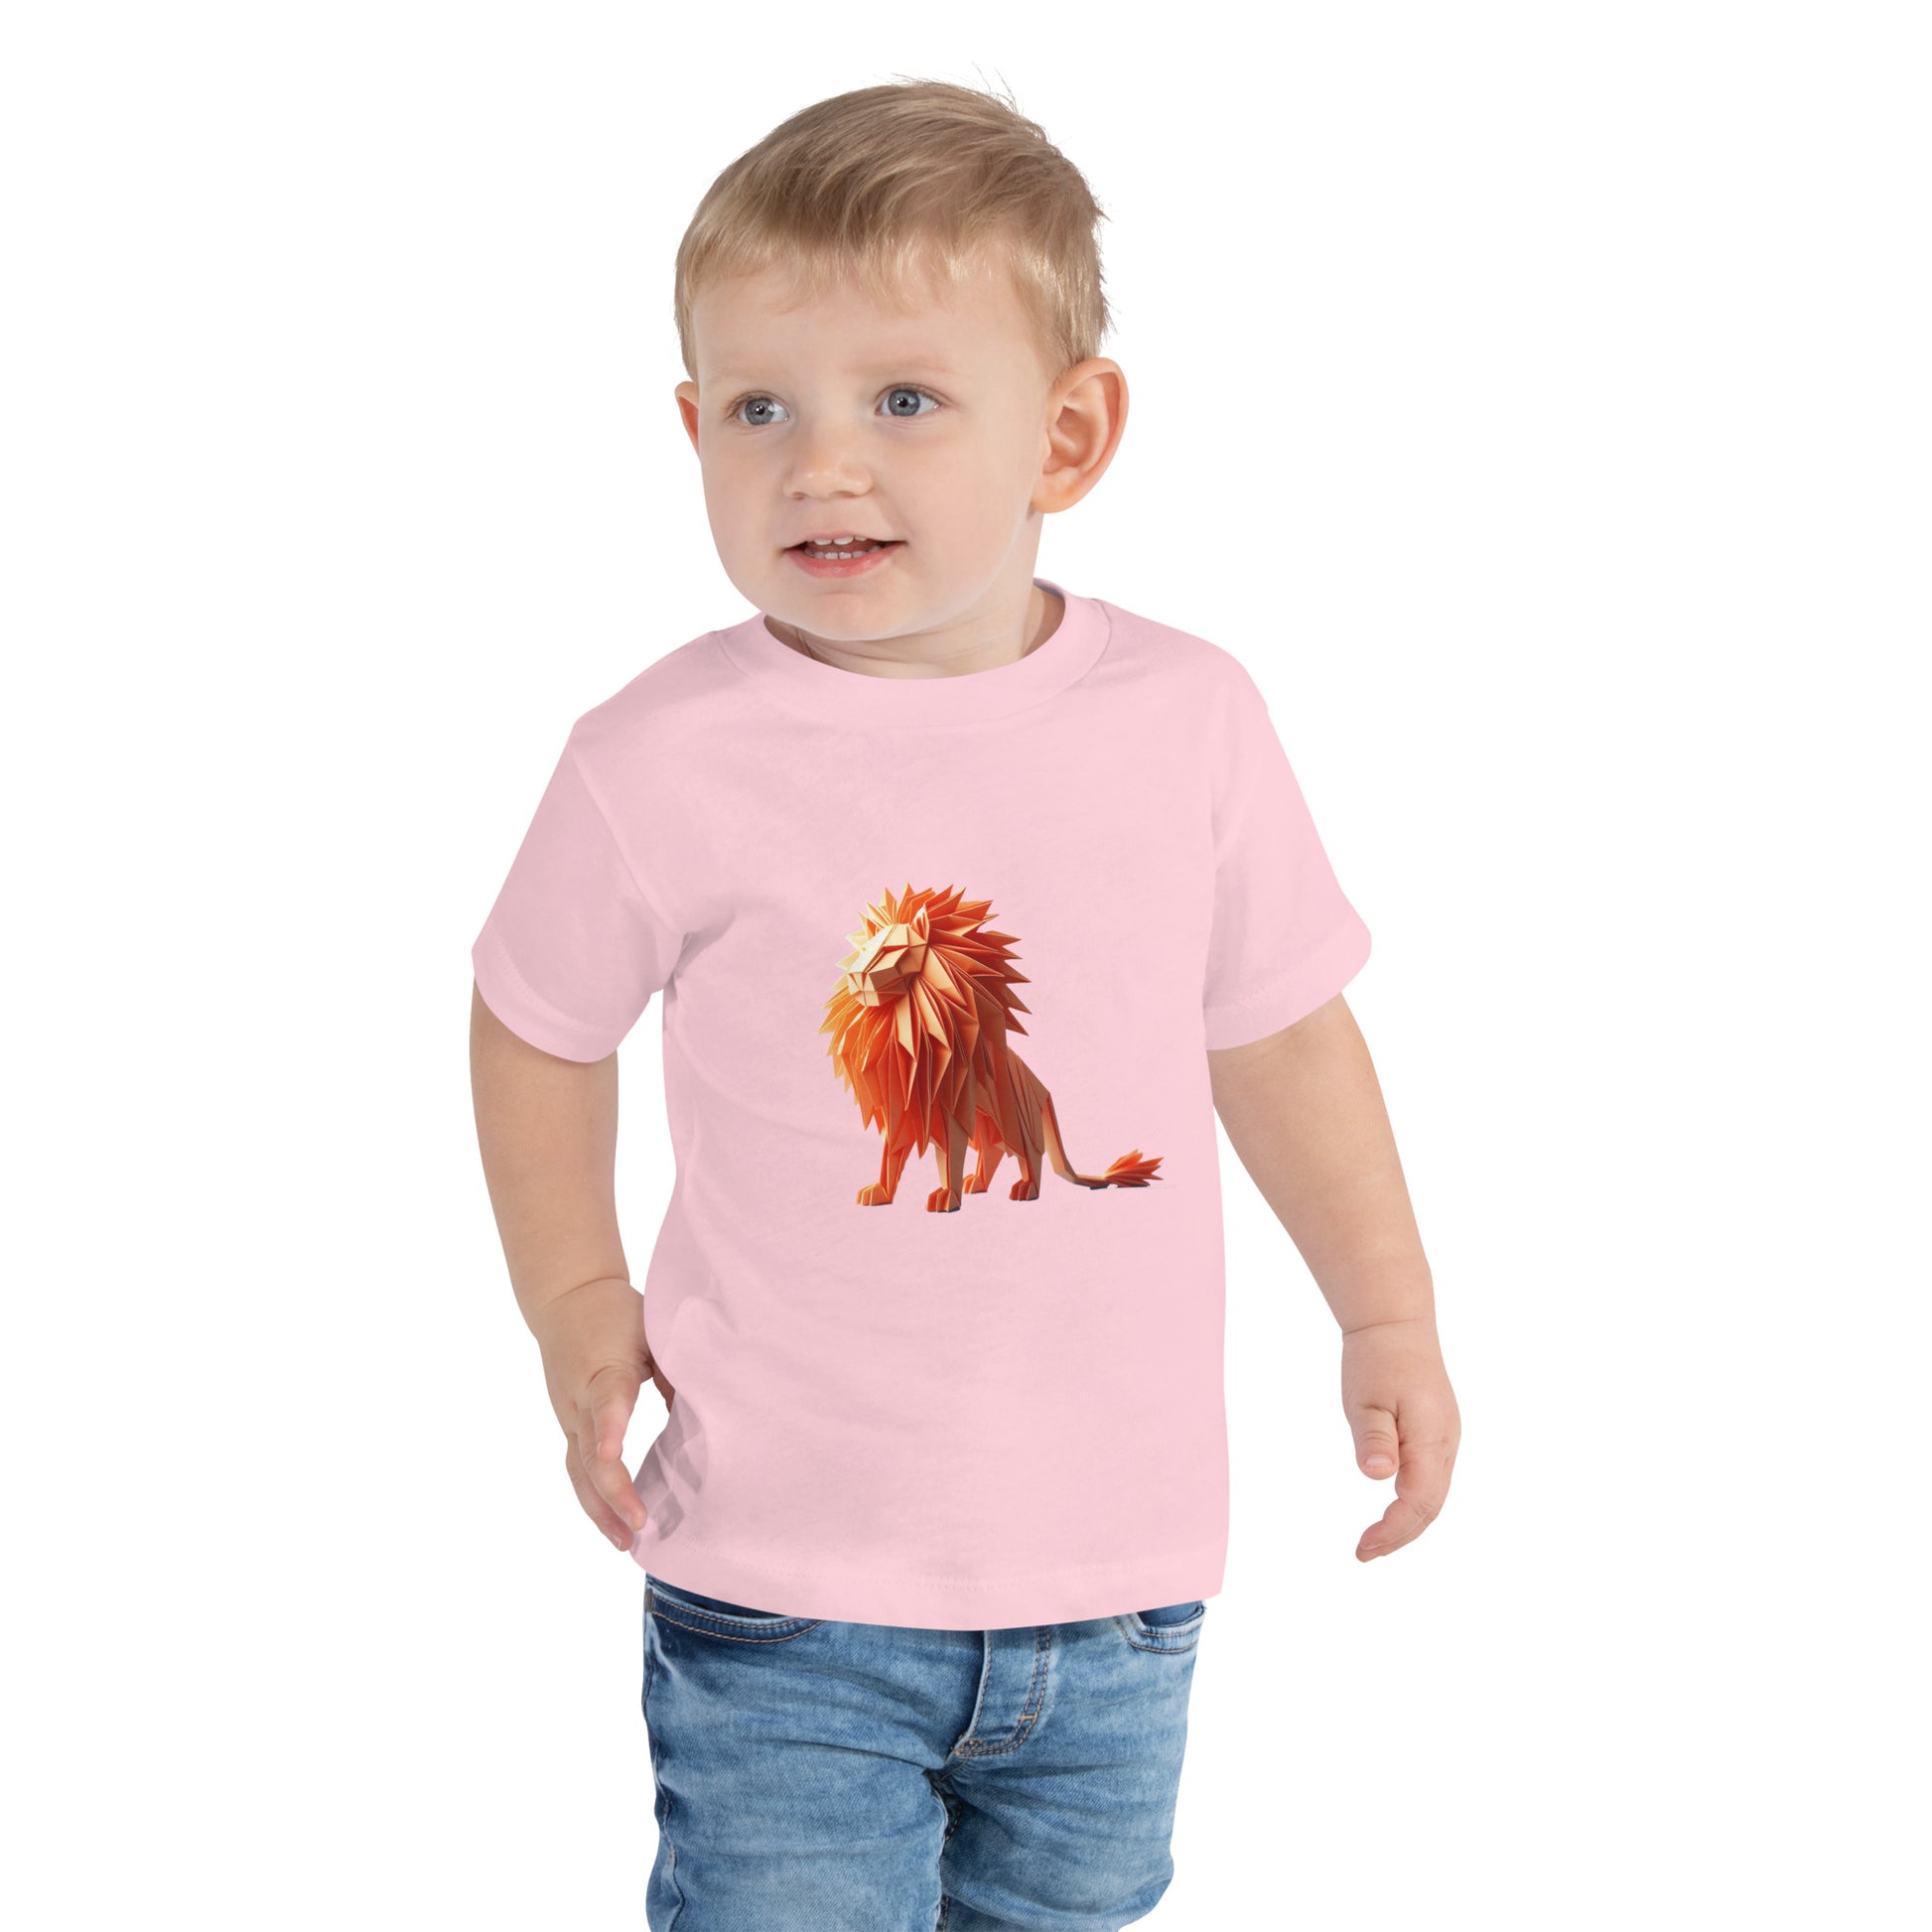 Toddler with a pink T-shirt with a print of a lion